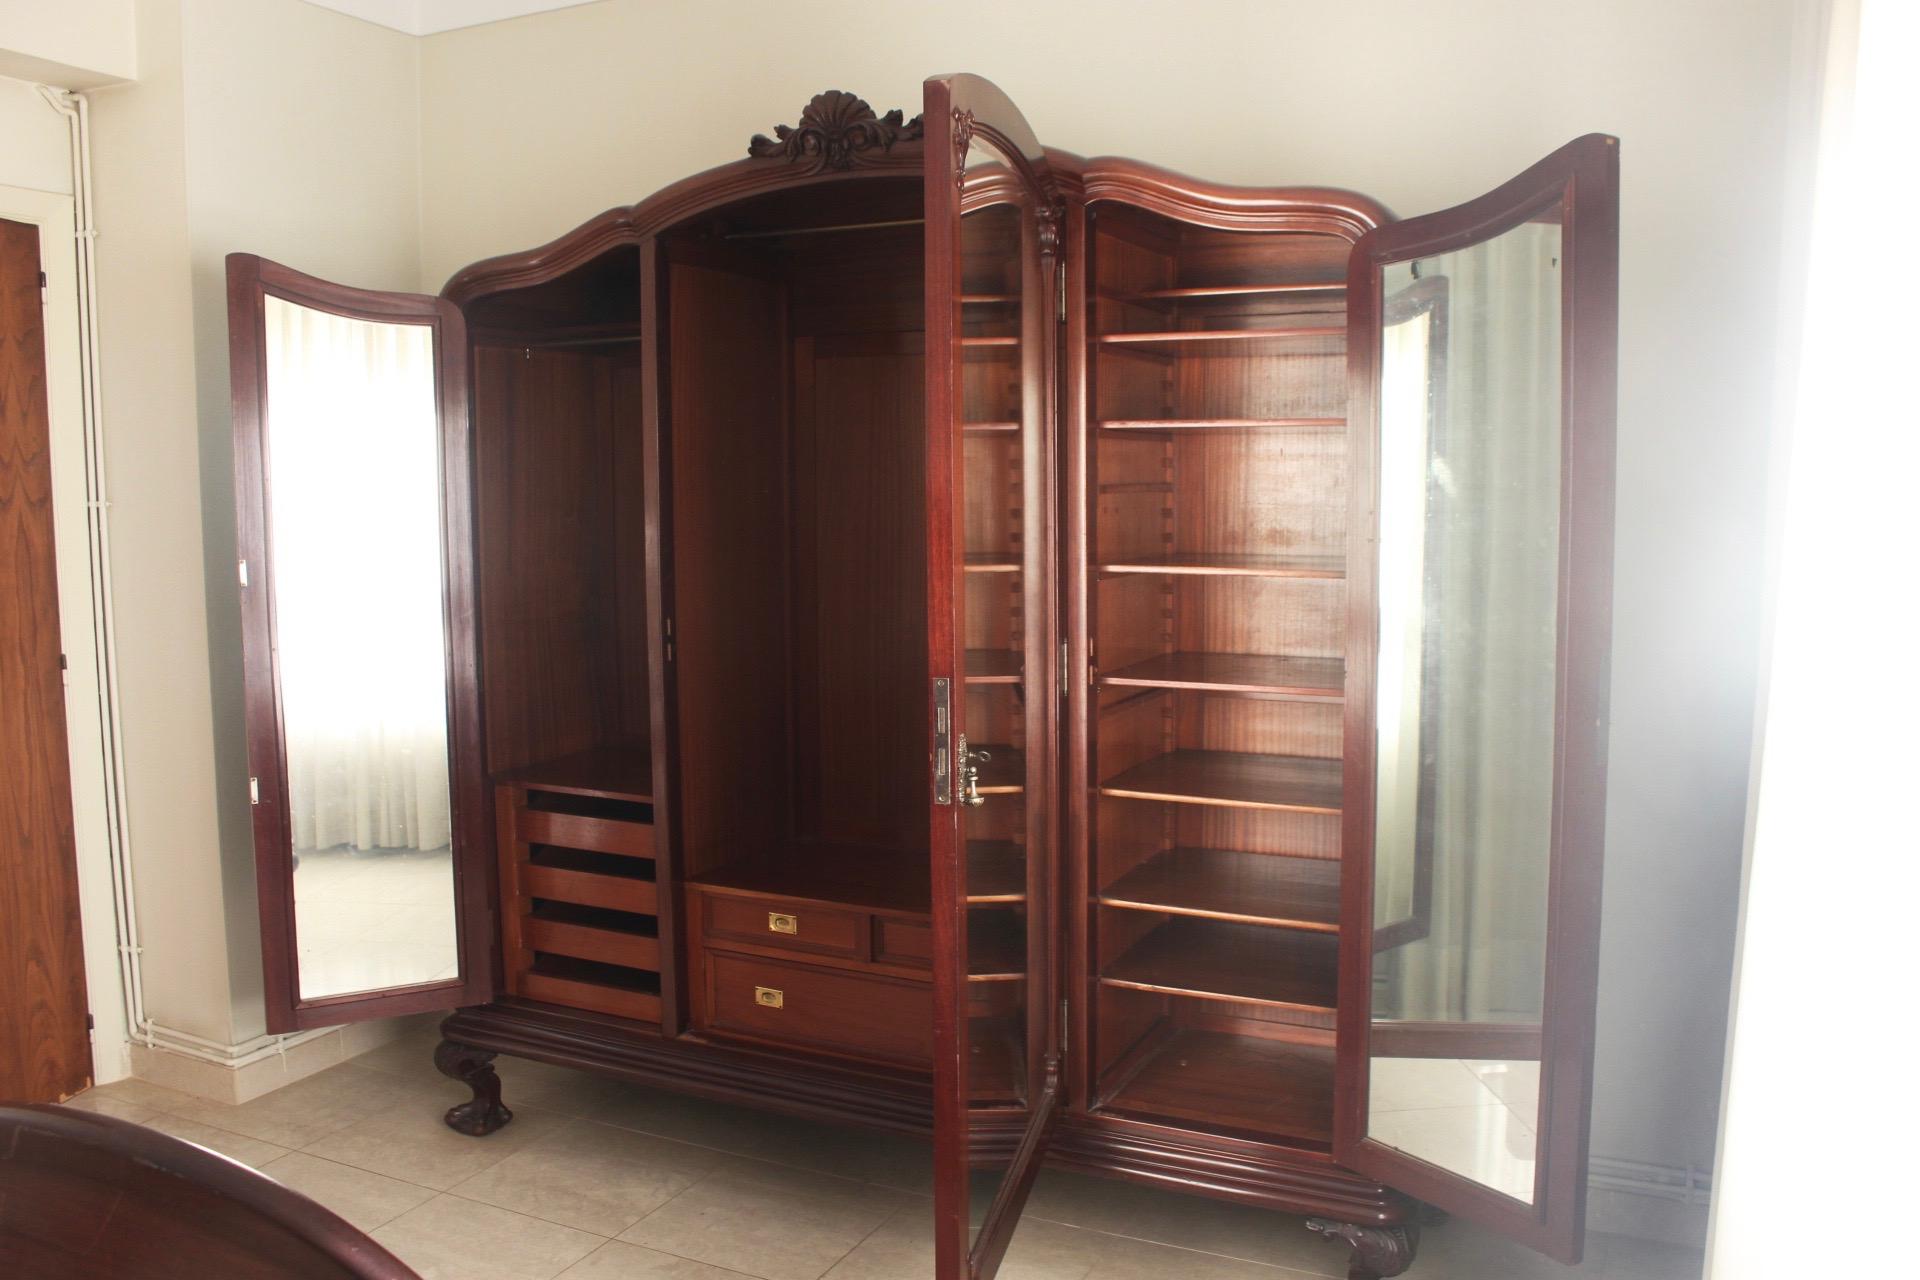 Chippendale Ball & Claw Mahogany Wood Armoire or Wardrobe with 3 Vanity Mirrors (19. Jahrhundert) im Angebot